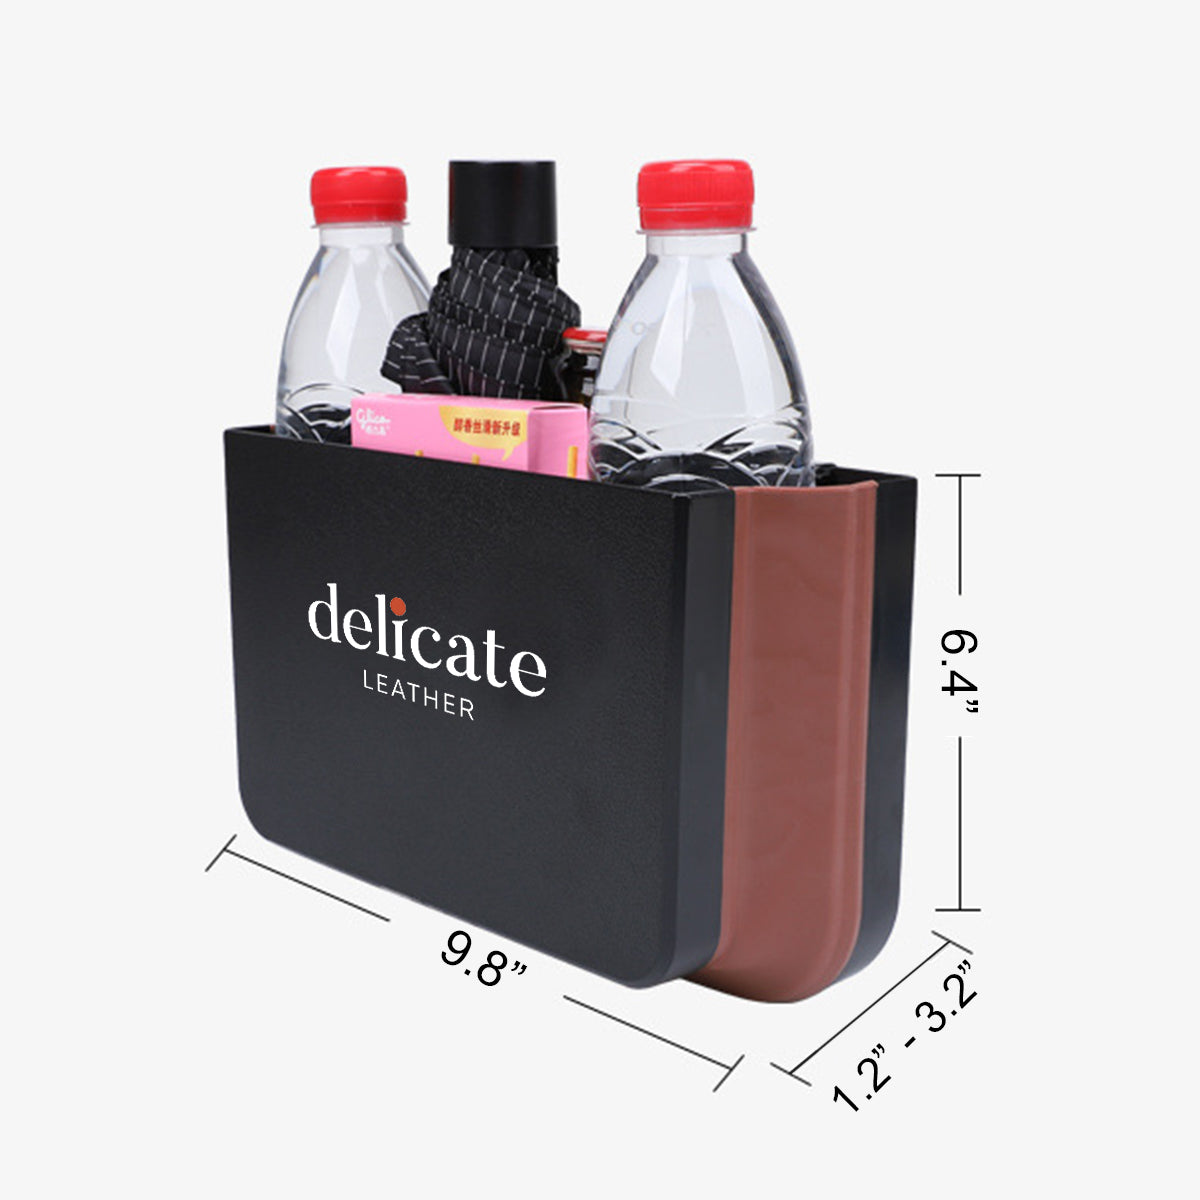 Delicate Leather Hanging Waterproof Car Trash can-Foldable, Custom For Your Cars, Waterproof, and Equipped with Cup Holders and Trays. Multi-Purpose, Car Accessories WQ11992